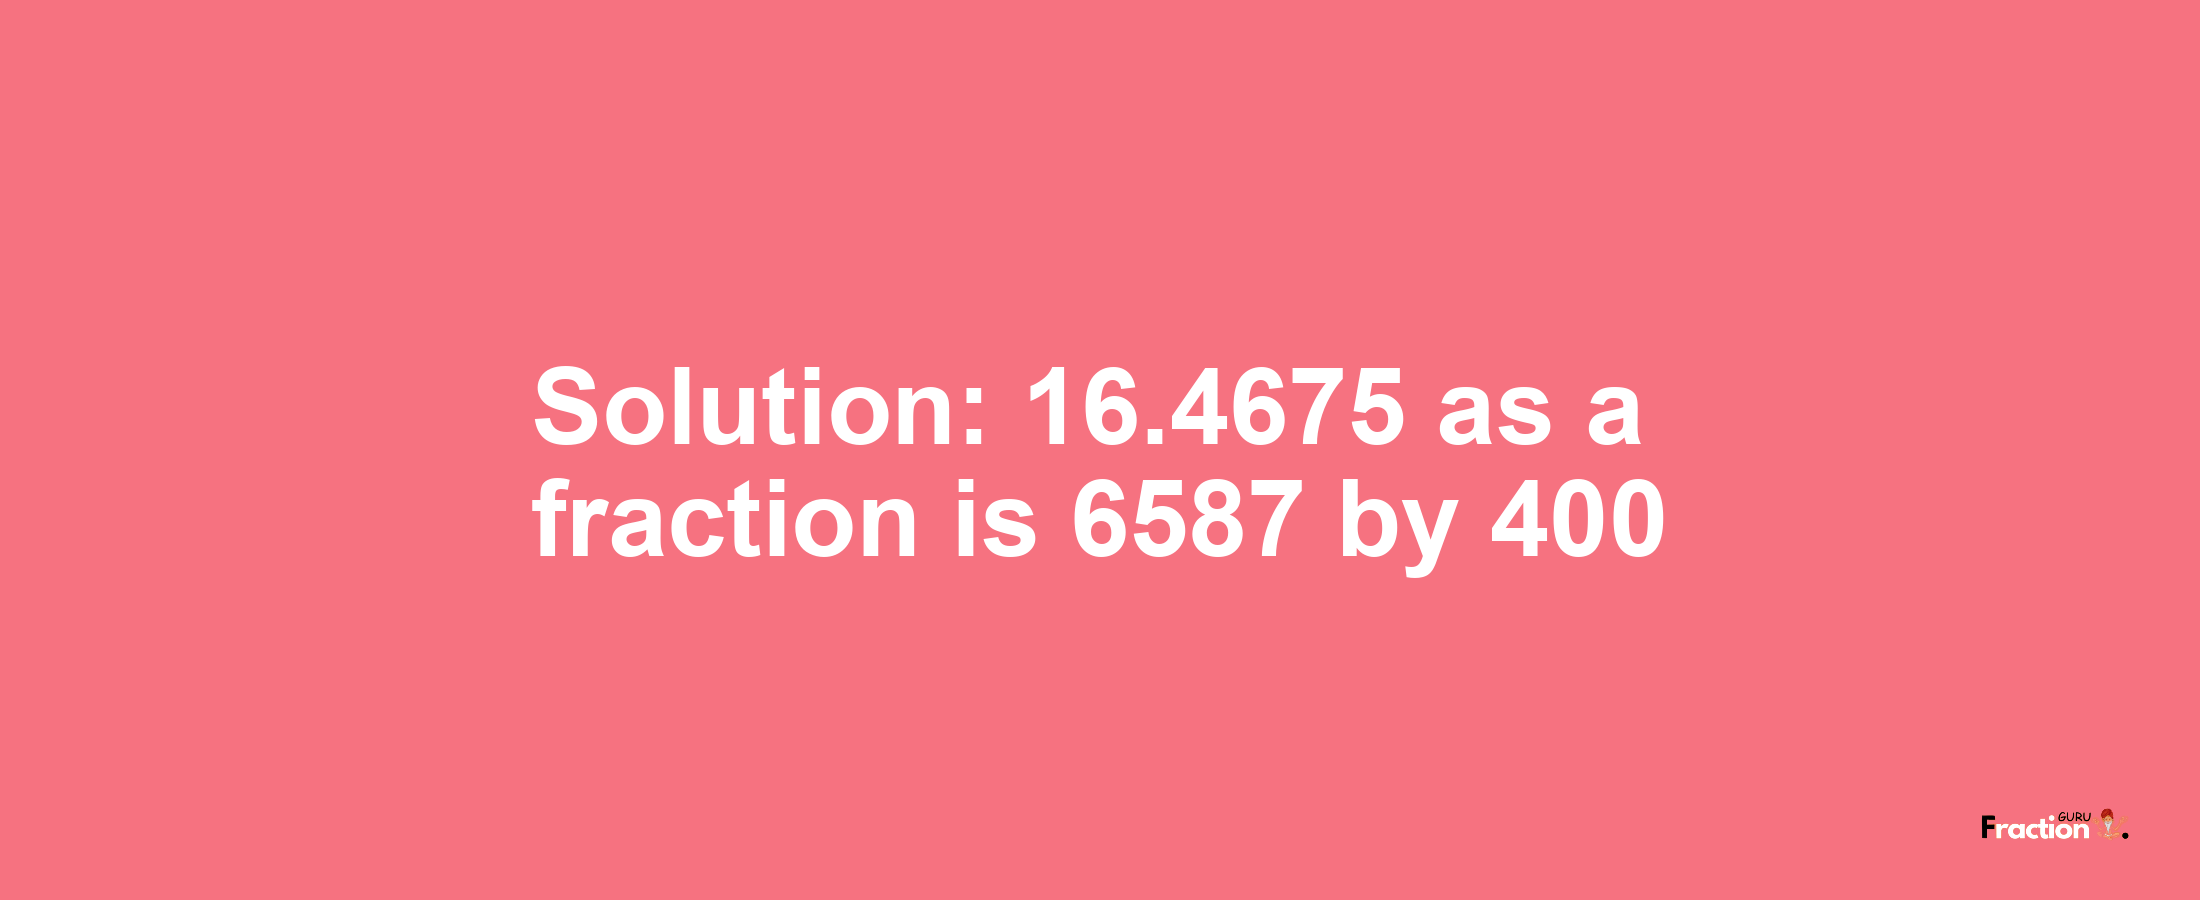 Solution:16.4675 as a fraction is 6587/400